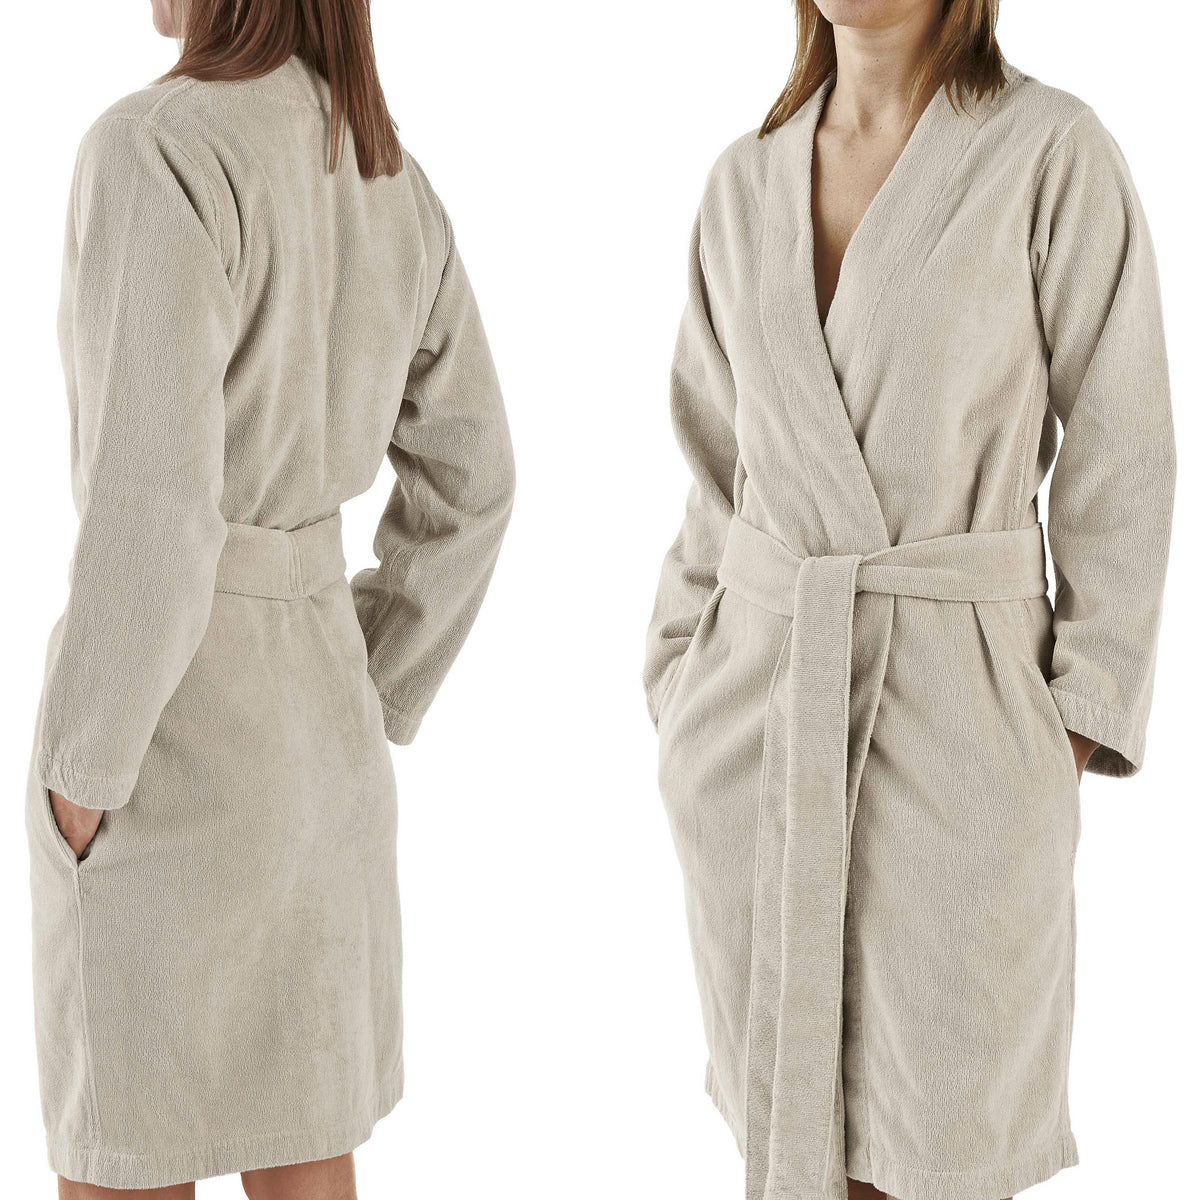 Abyss Spa Bath Robes and Slippers Front and Back White Fine Linens